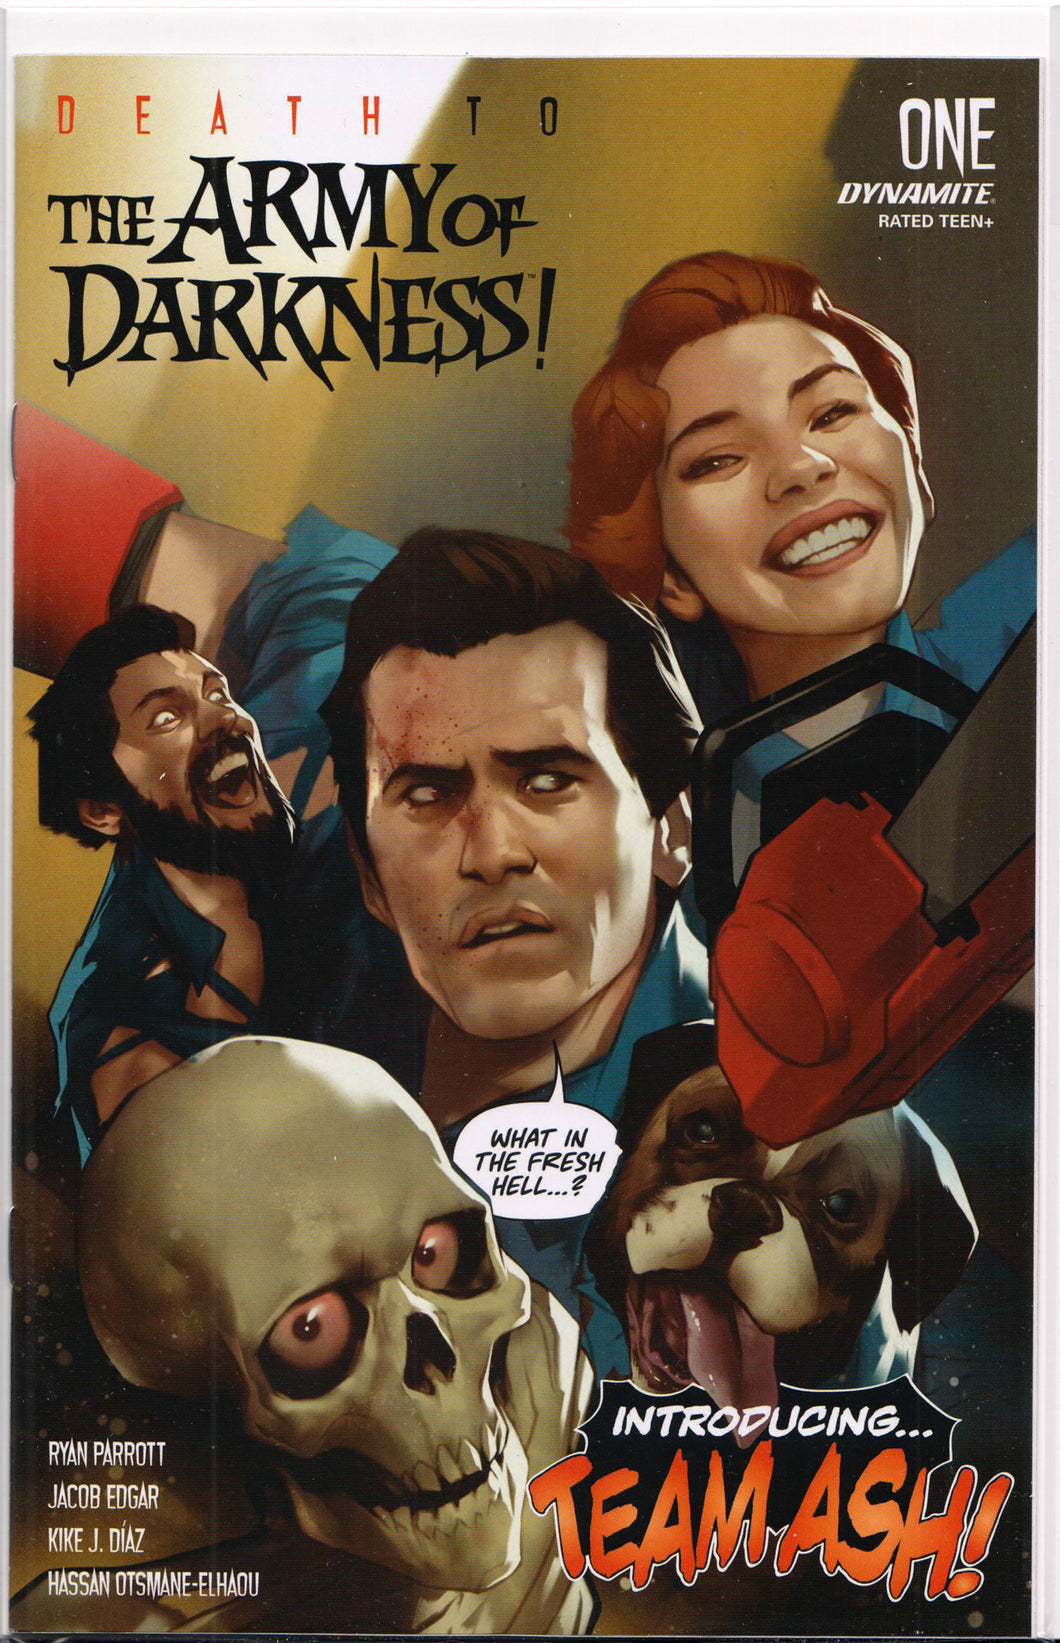 DEATH TO THE ARMY OF DARKNESS #1 (BEN OLIVER VARIANT) COMIC BOOK ~ Dynamite